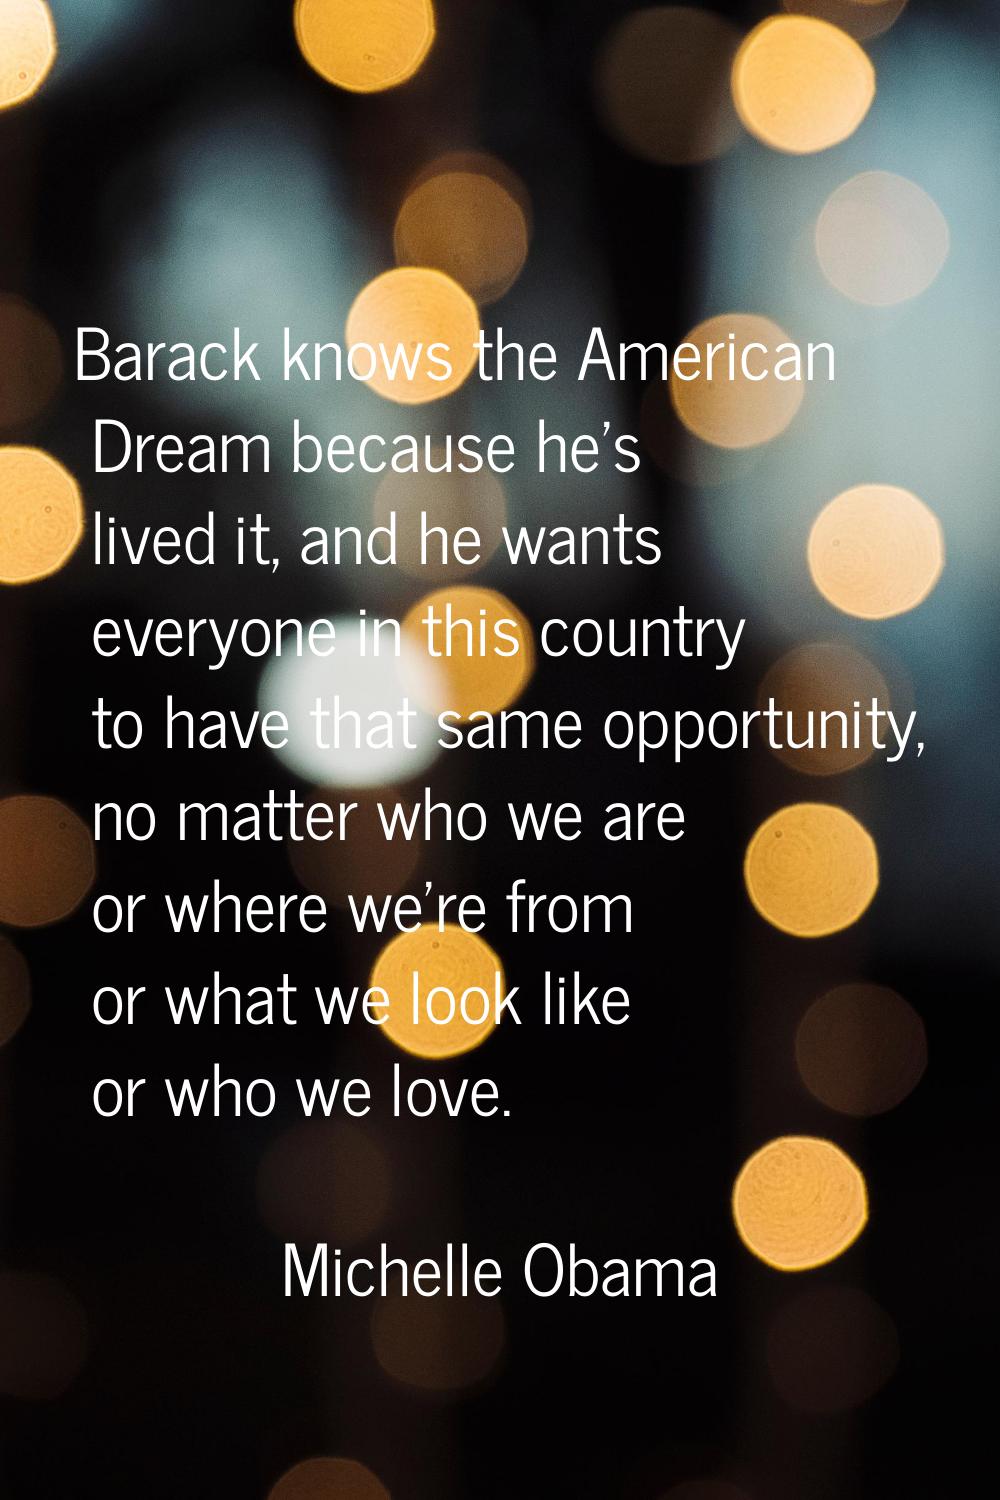 Barack knows the American Dream because he's lived it, and he wants everyone in this country to hav